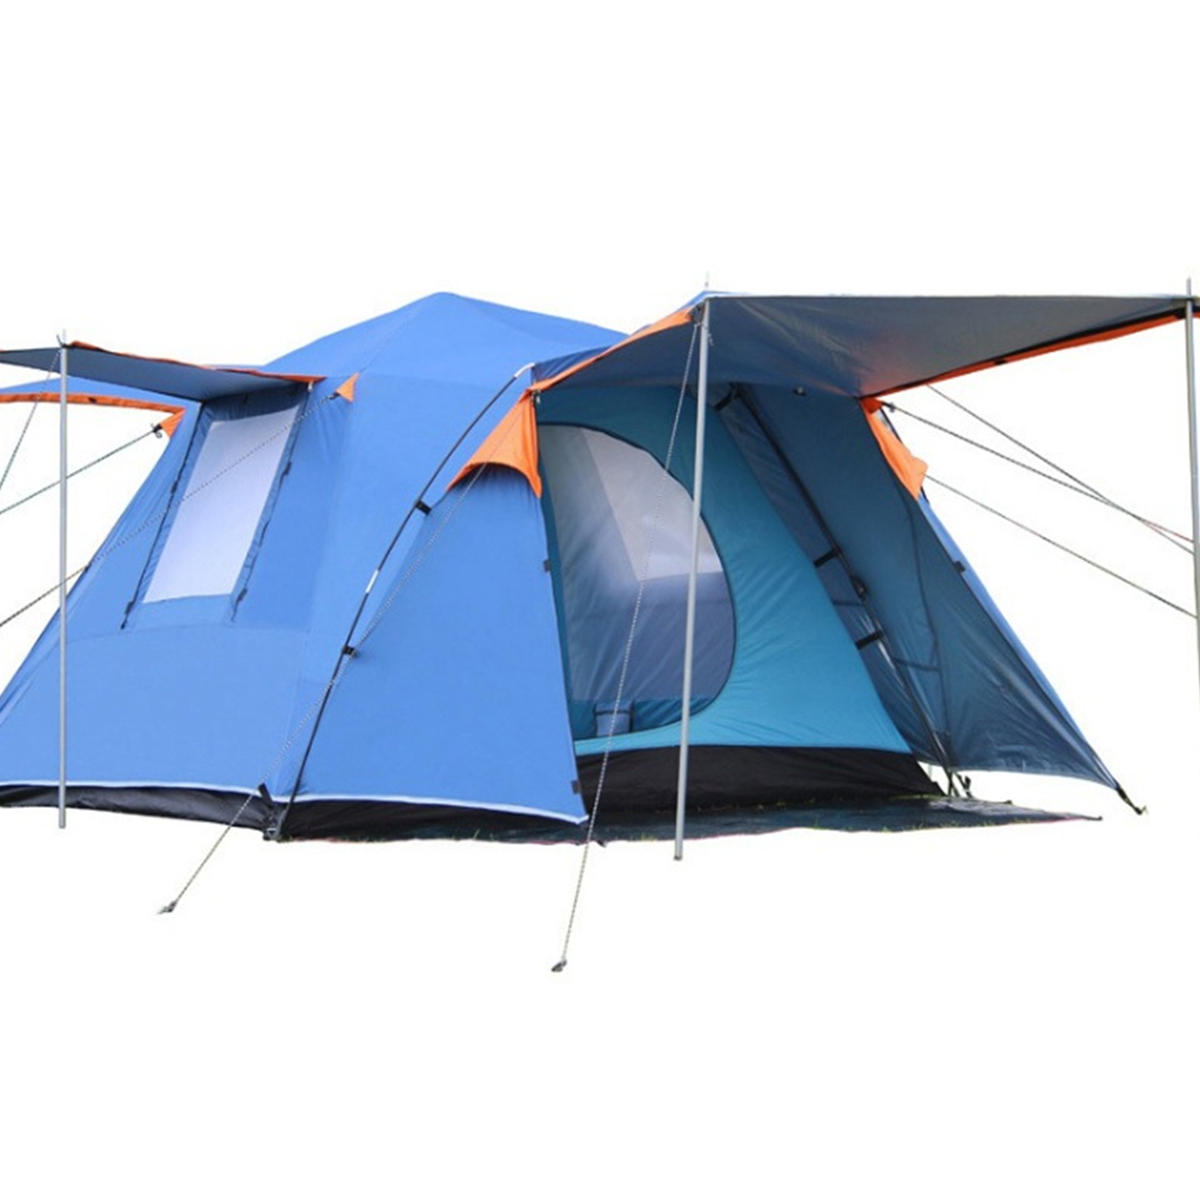 Outdoor 3-4 People Automatic Tent Camping Waterproof Double Layer Canopy Sunshade